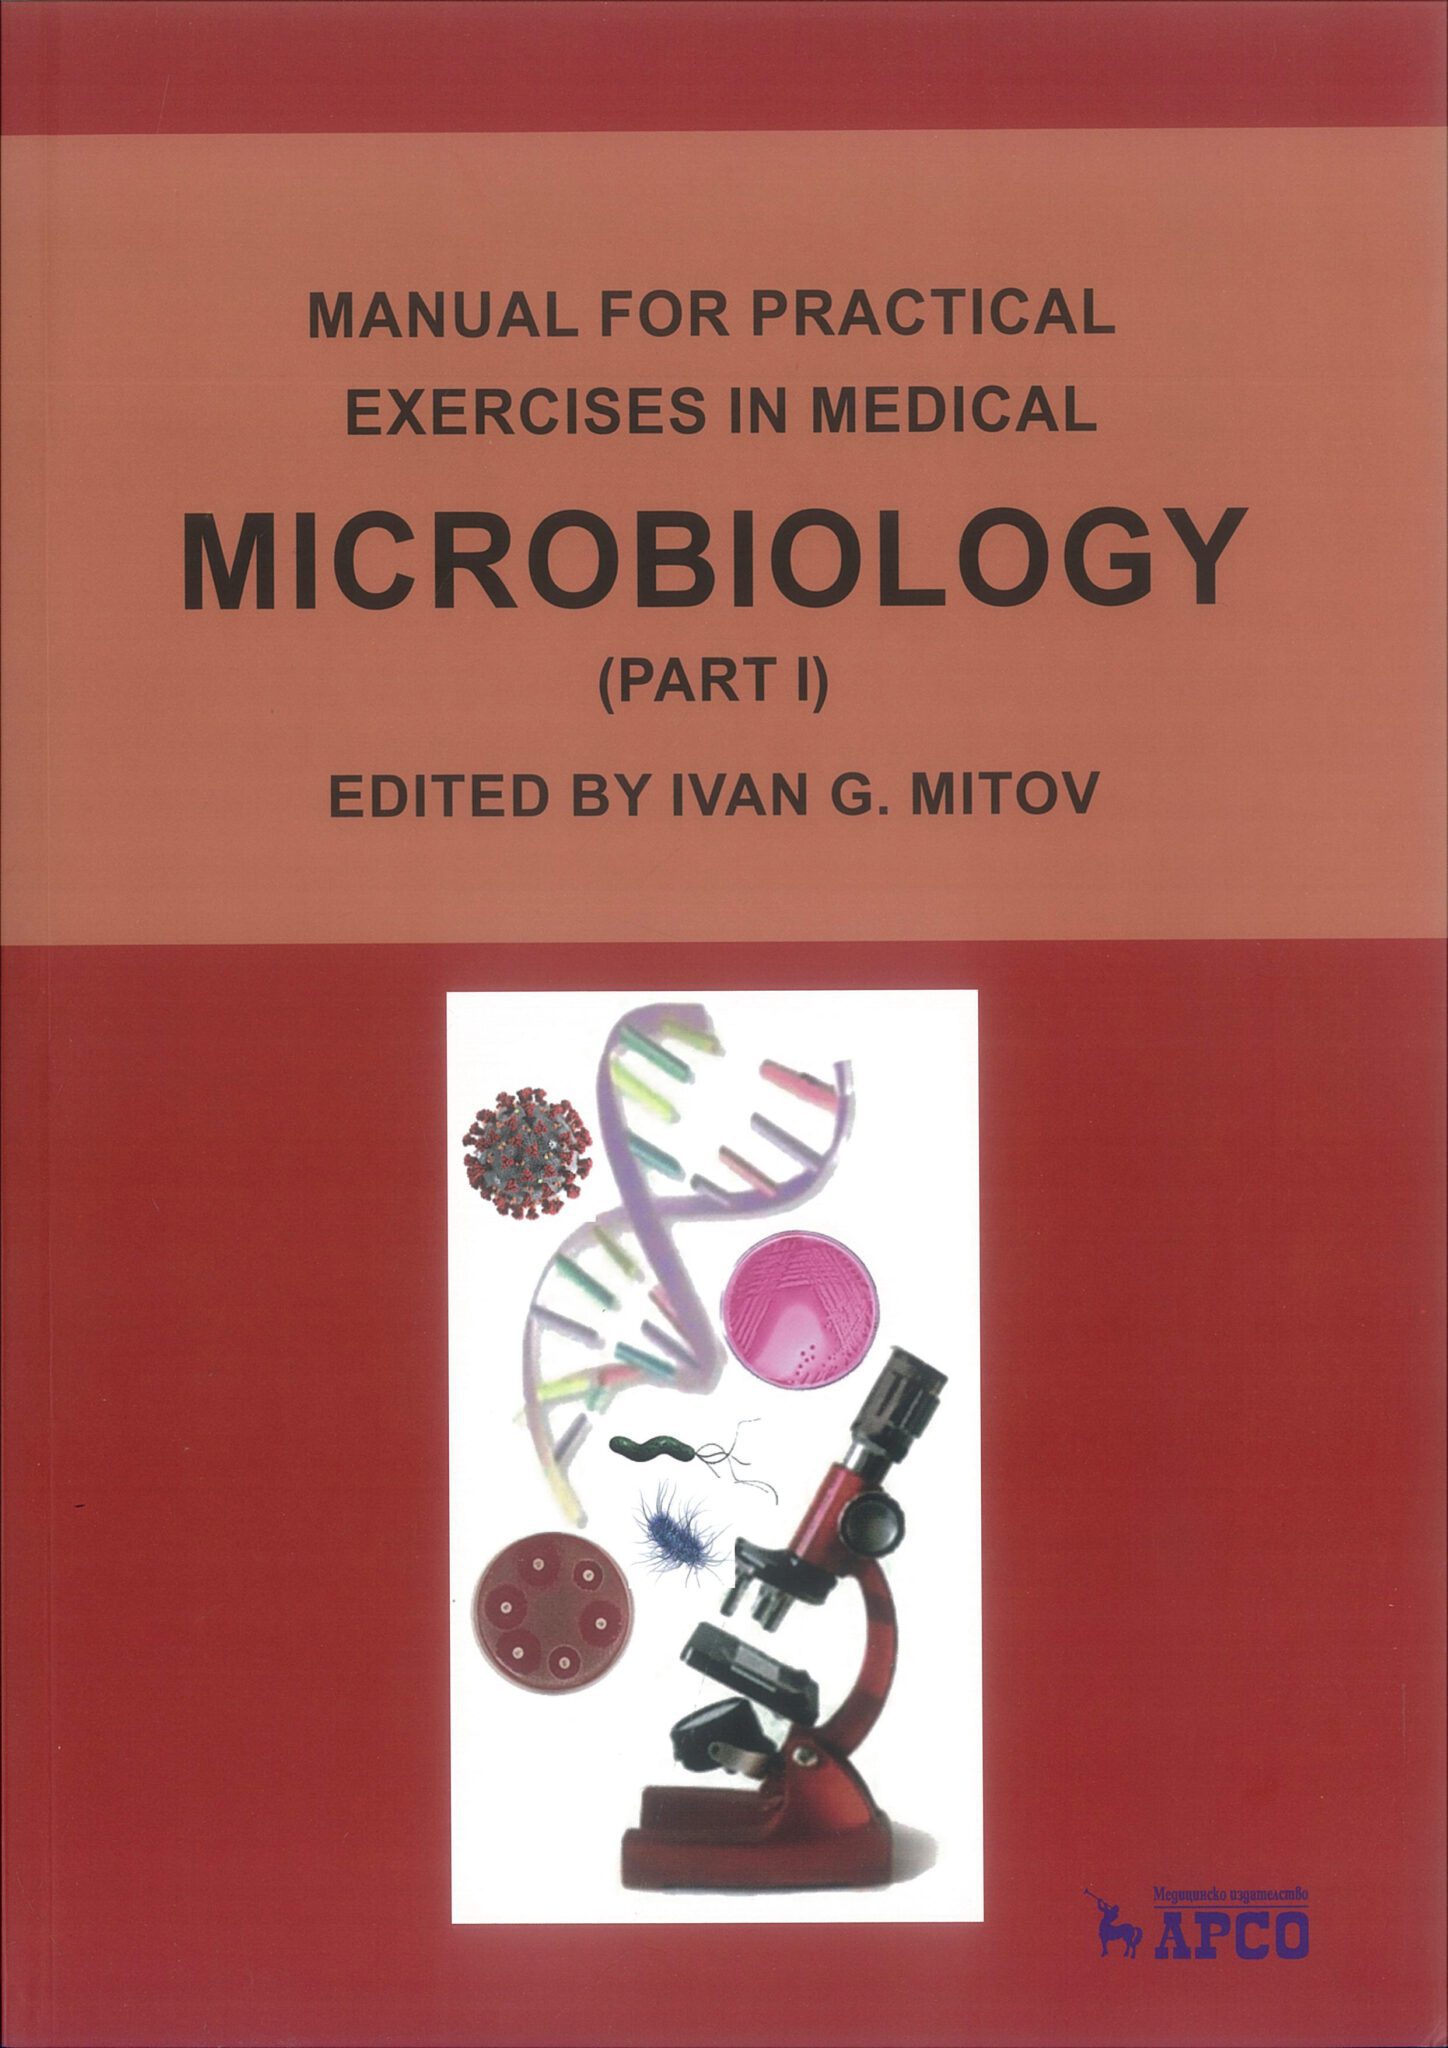 Medical　Център　for　Exercises　–　Manual　Microbiology　Part　Сити　I　Practical　МЕДИЦИНСКА　ЛИТЕРАТУРА　in　Варна